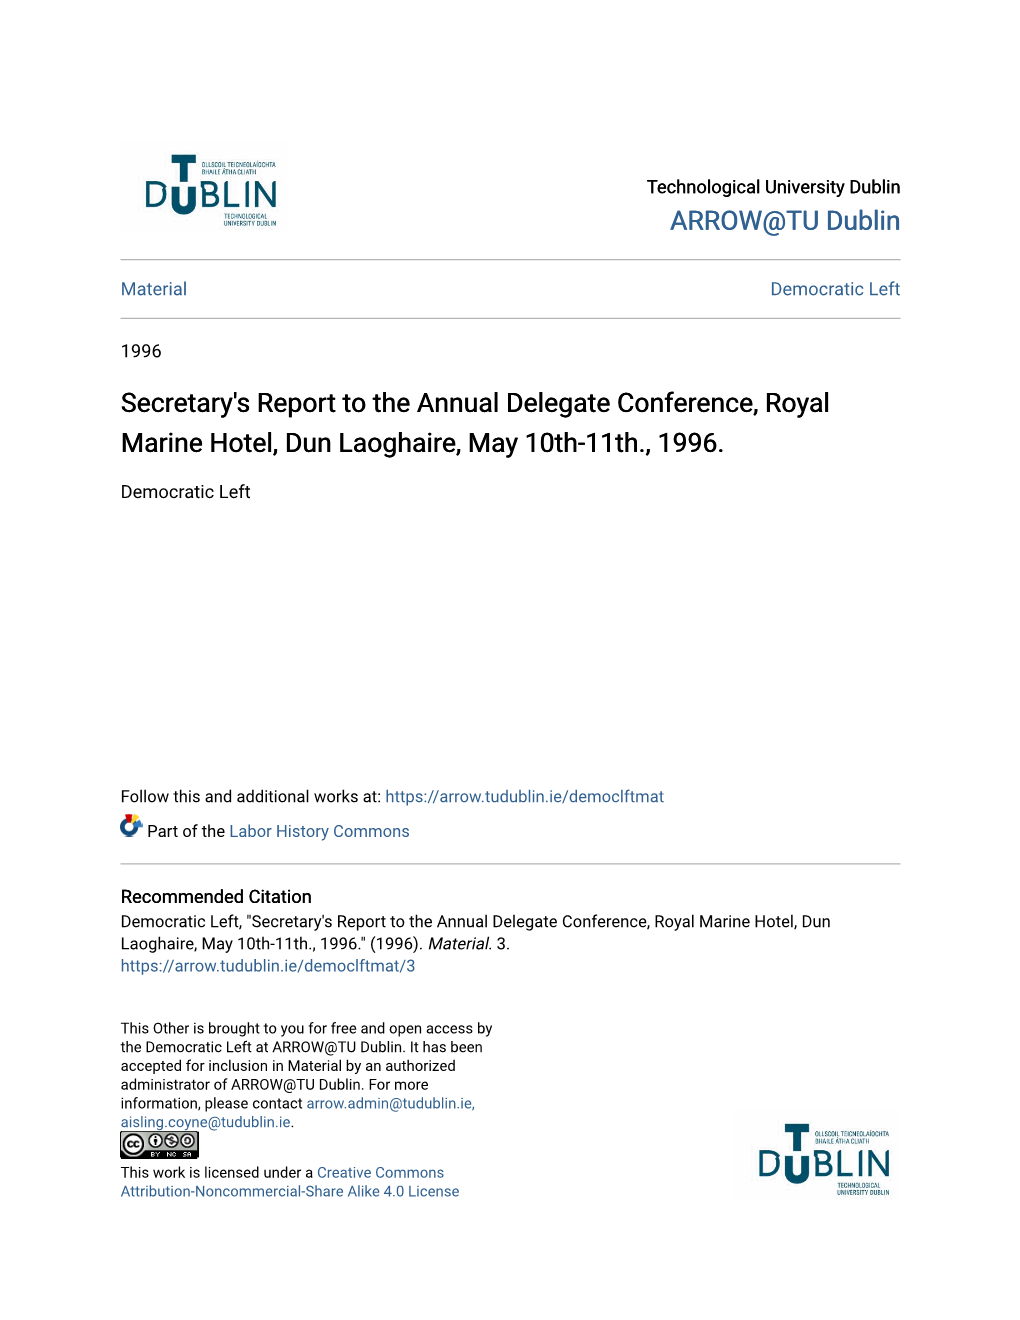 Secretary's Report to the Annual Delegate Conference, Royal Marine Hotel, Dun Laoghaire, May 10Th-11Th., 1996